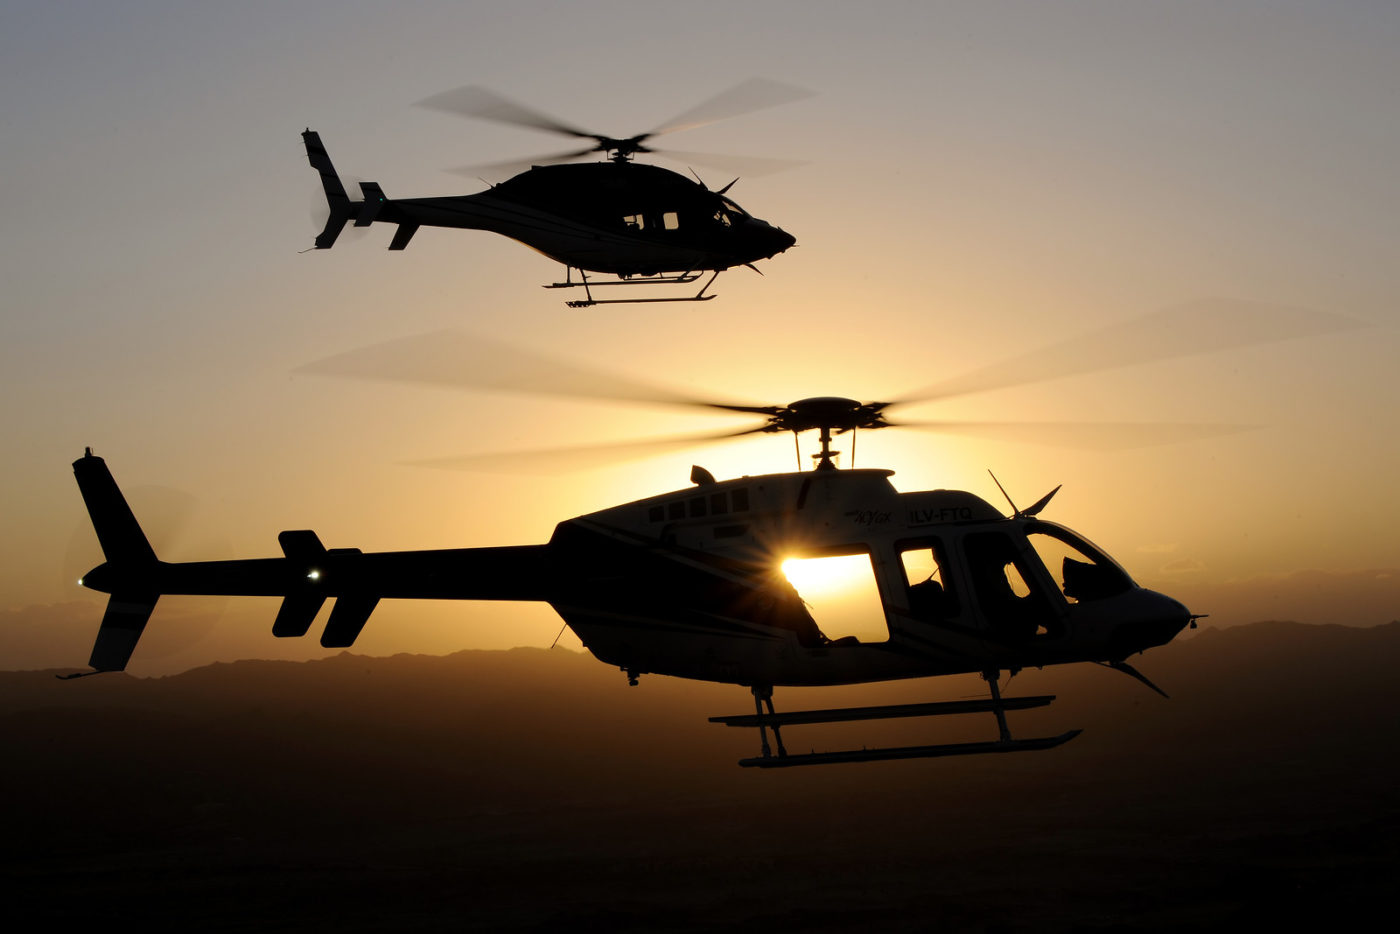 Bell manufactures military rotorcraft in and around Fort Worth, as well as in Amarillo, Texas, and commercial helicopters in Mirabel, Quebec. The company provides training and support services around the world. Anthony Pecchi Photo